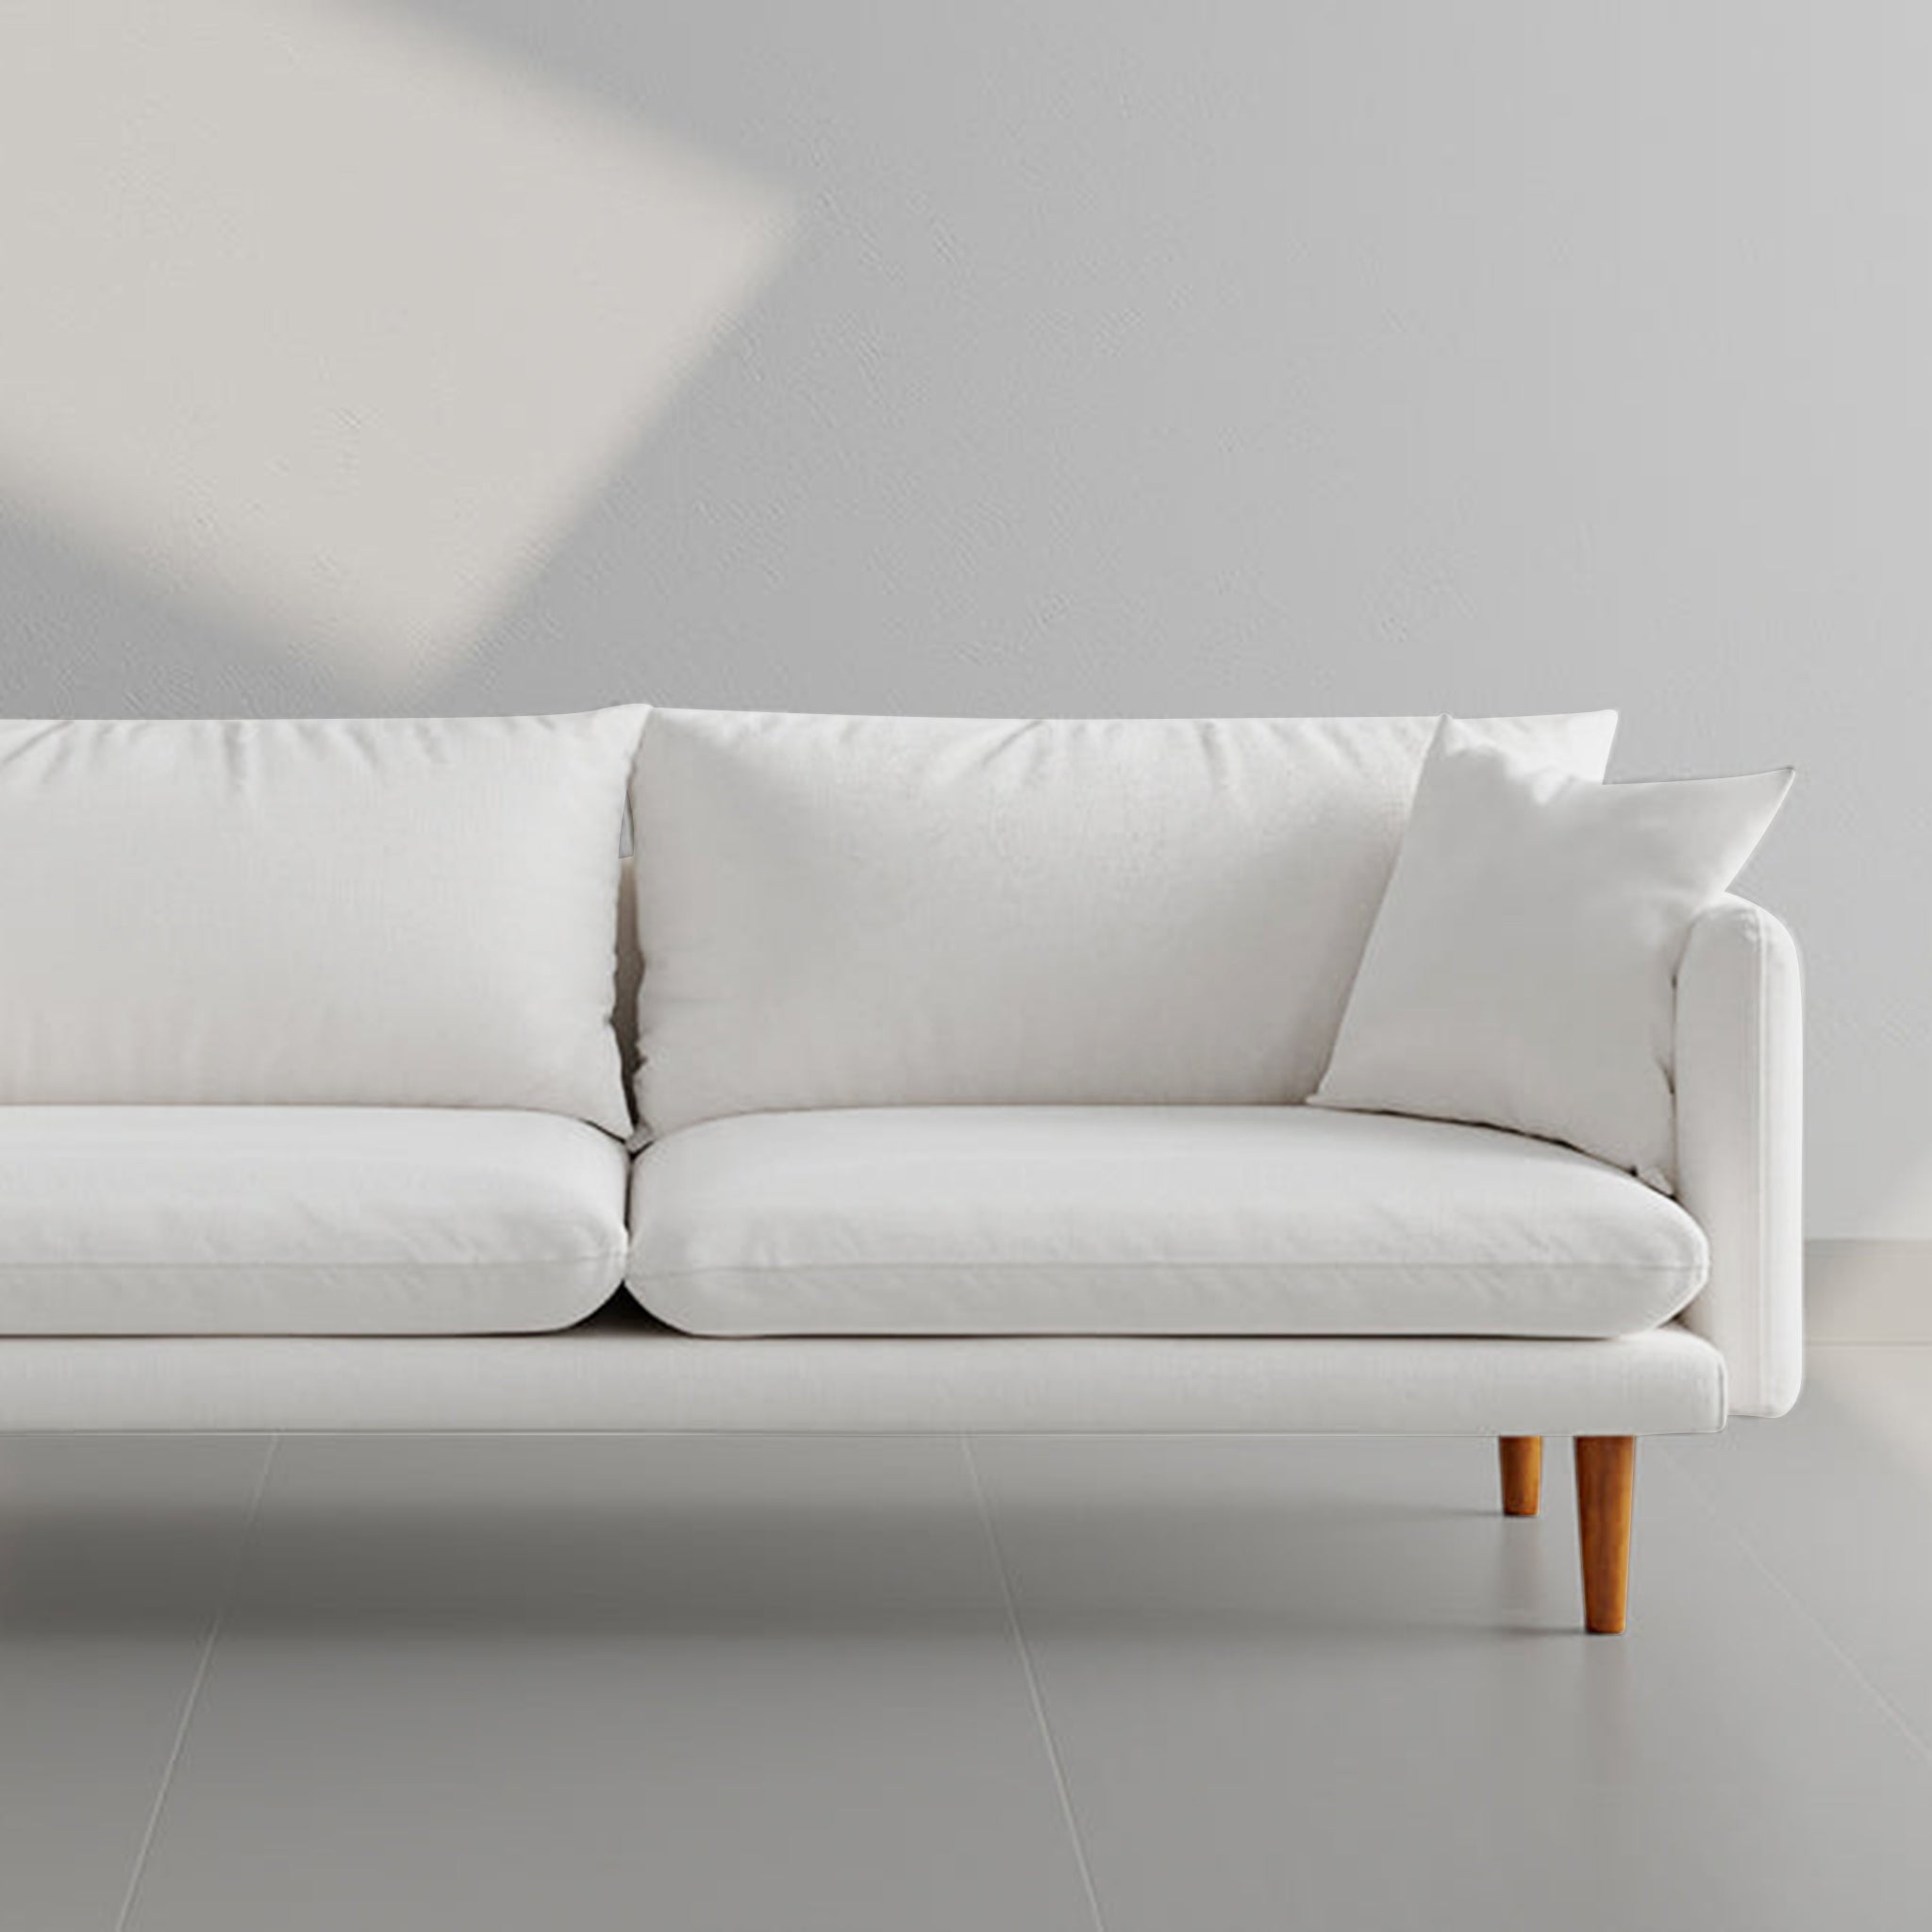 Modern white sofa with wooden legs and cozy cushions, perfect for a minimalist living room setup.